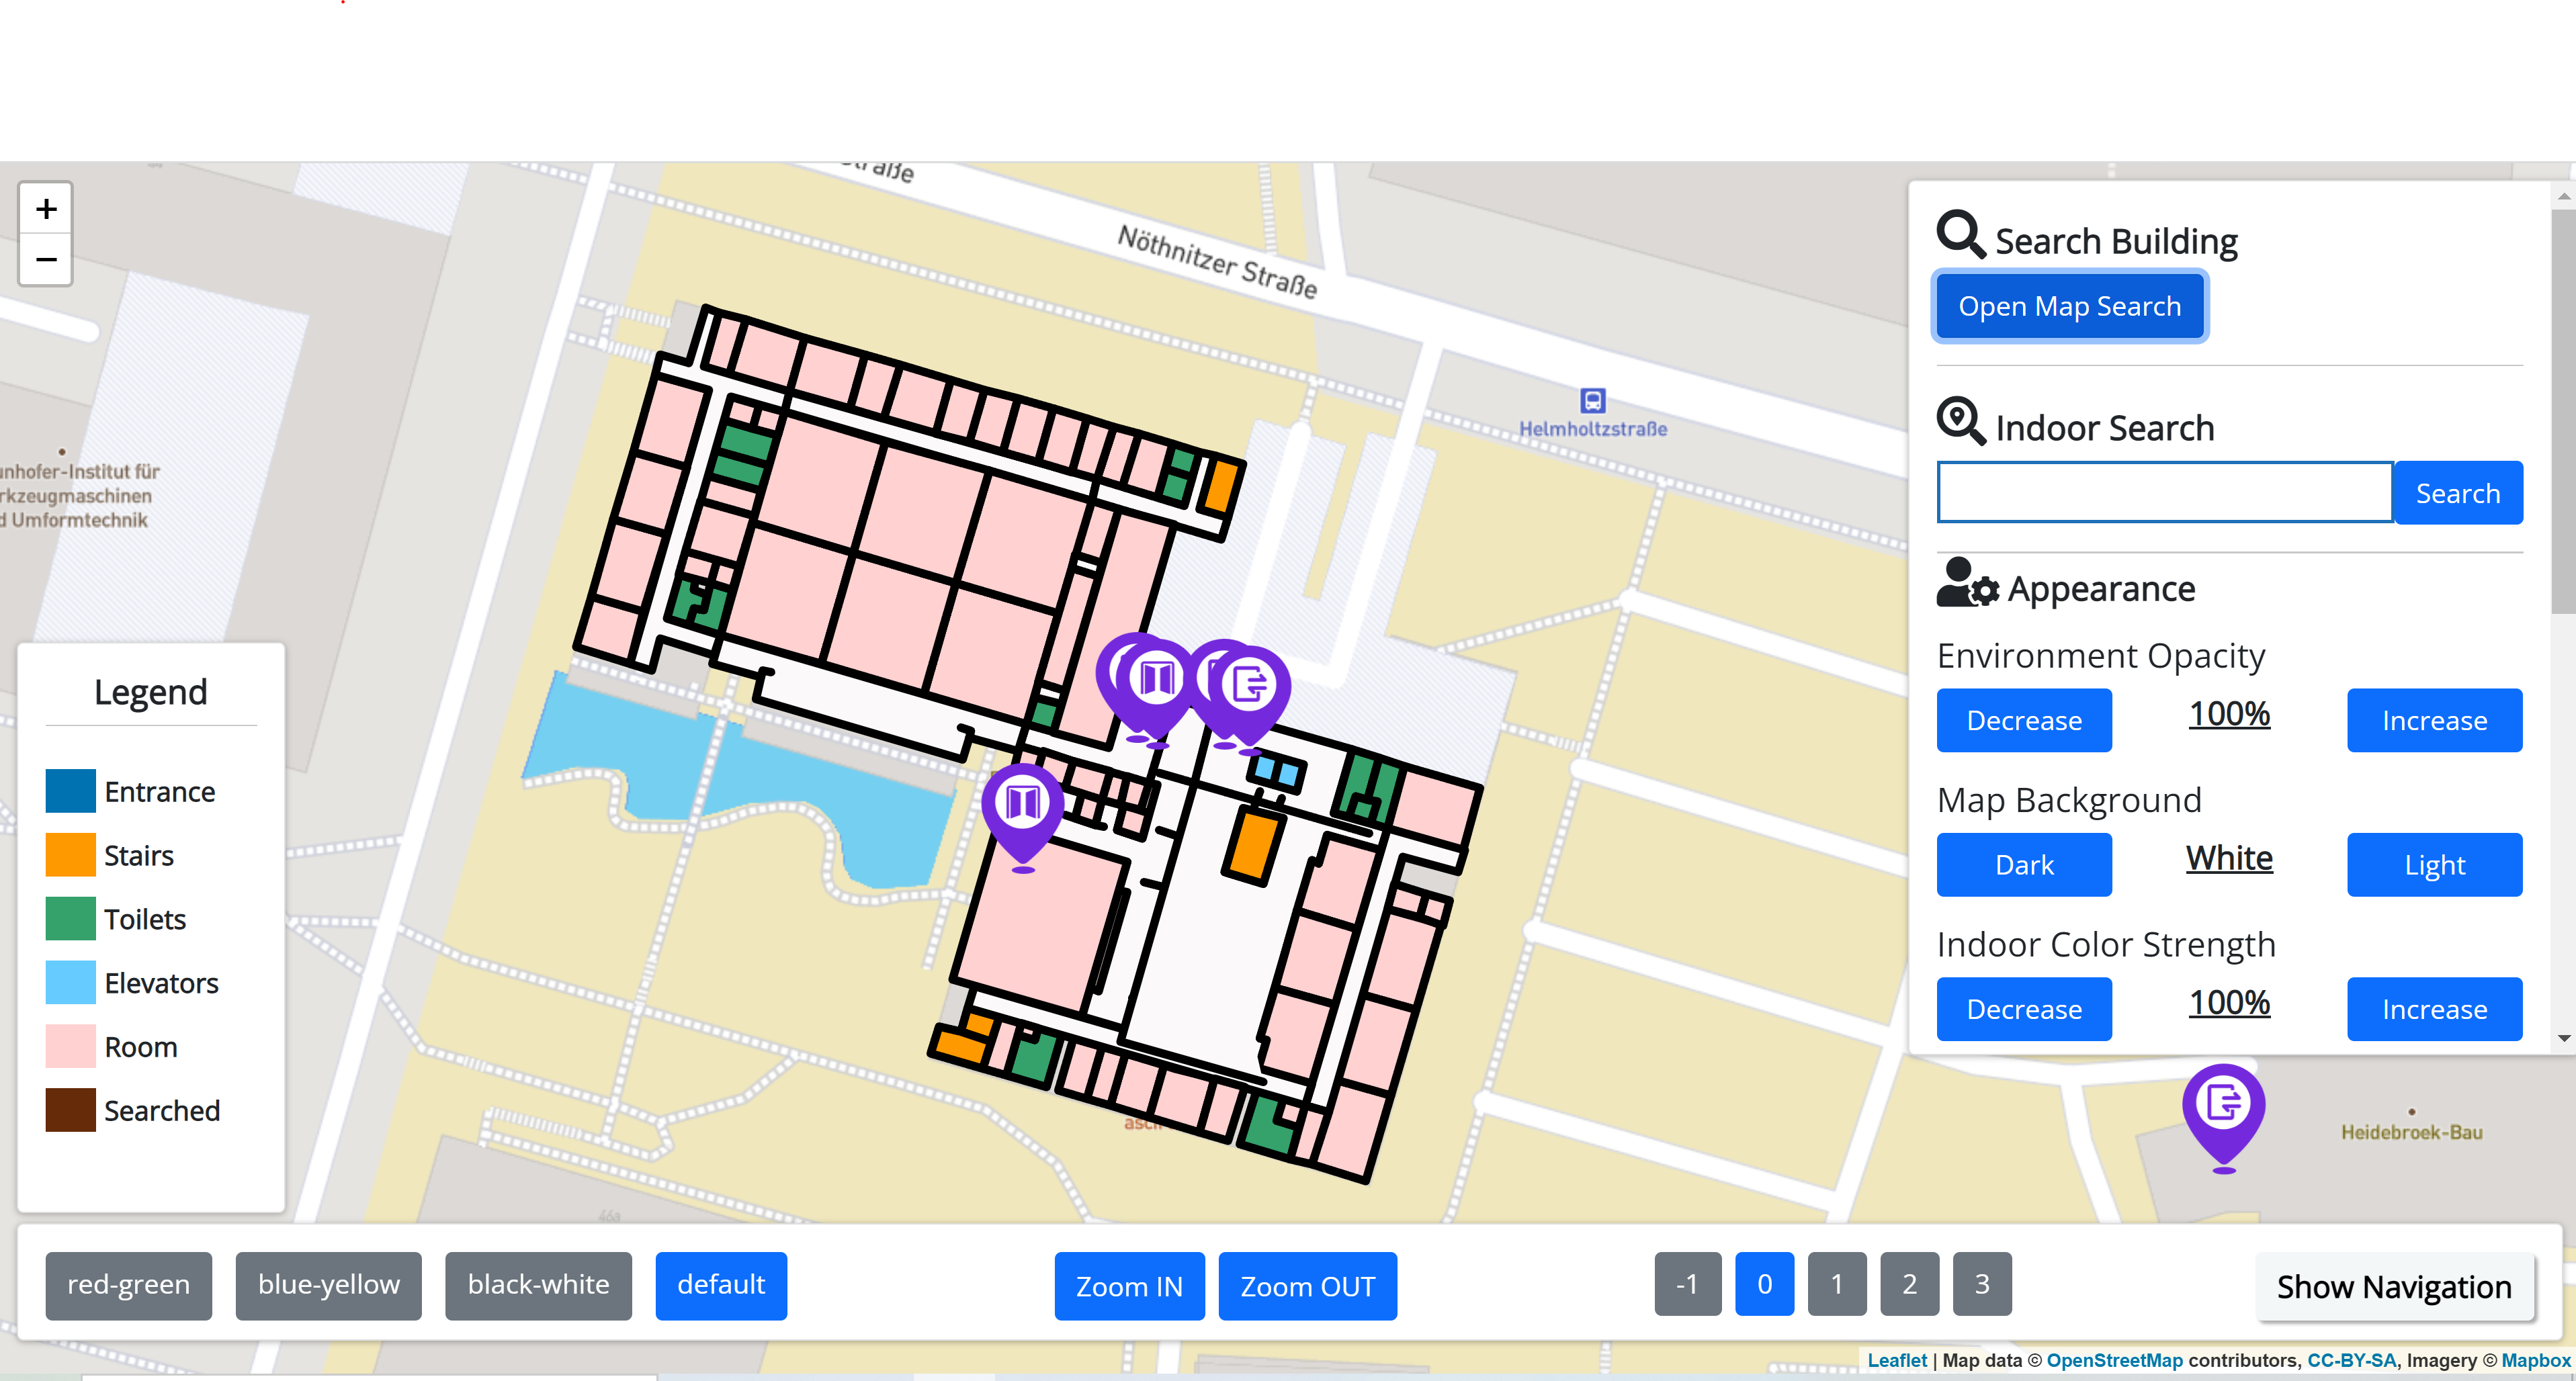 Screenshot of the prototype. In the middle you can see a building map with different markers and icons. The rooms have different colors. On the left is a legend with 6 entries where the colors are explained. At the bottom is a settings bar with the buttons: red-green, blue-yellow, black-white, default, zoom in, zoom out, -1, 0, 1, 2, 3 and show navigation. On the right site is a navigation bar with a search function for buildings and an indoor search, adjustments for the map environment, the map background, color strengths. 